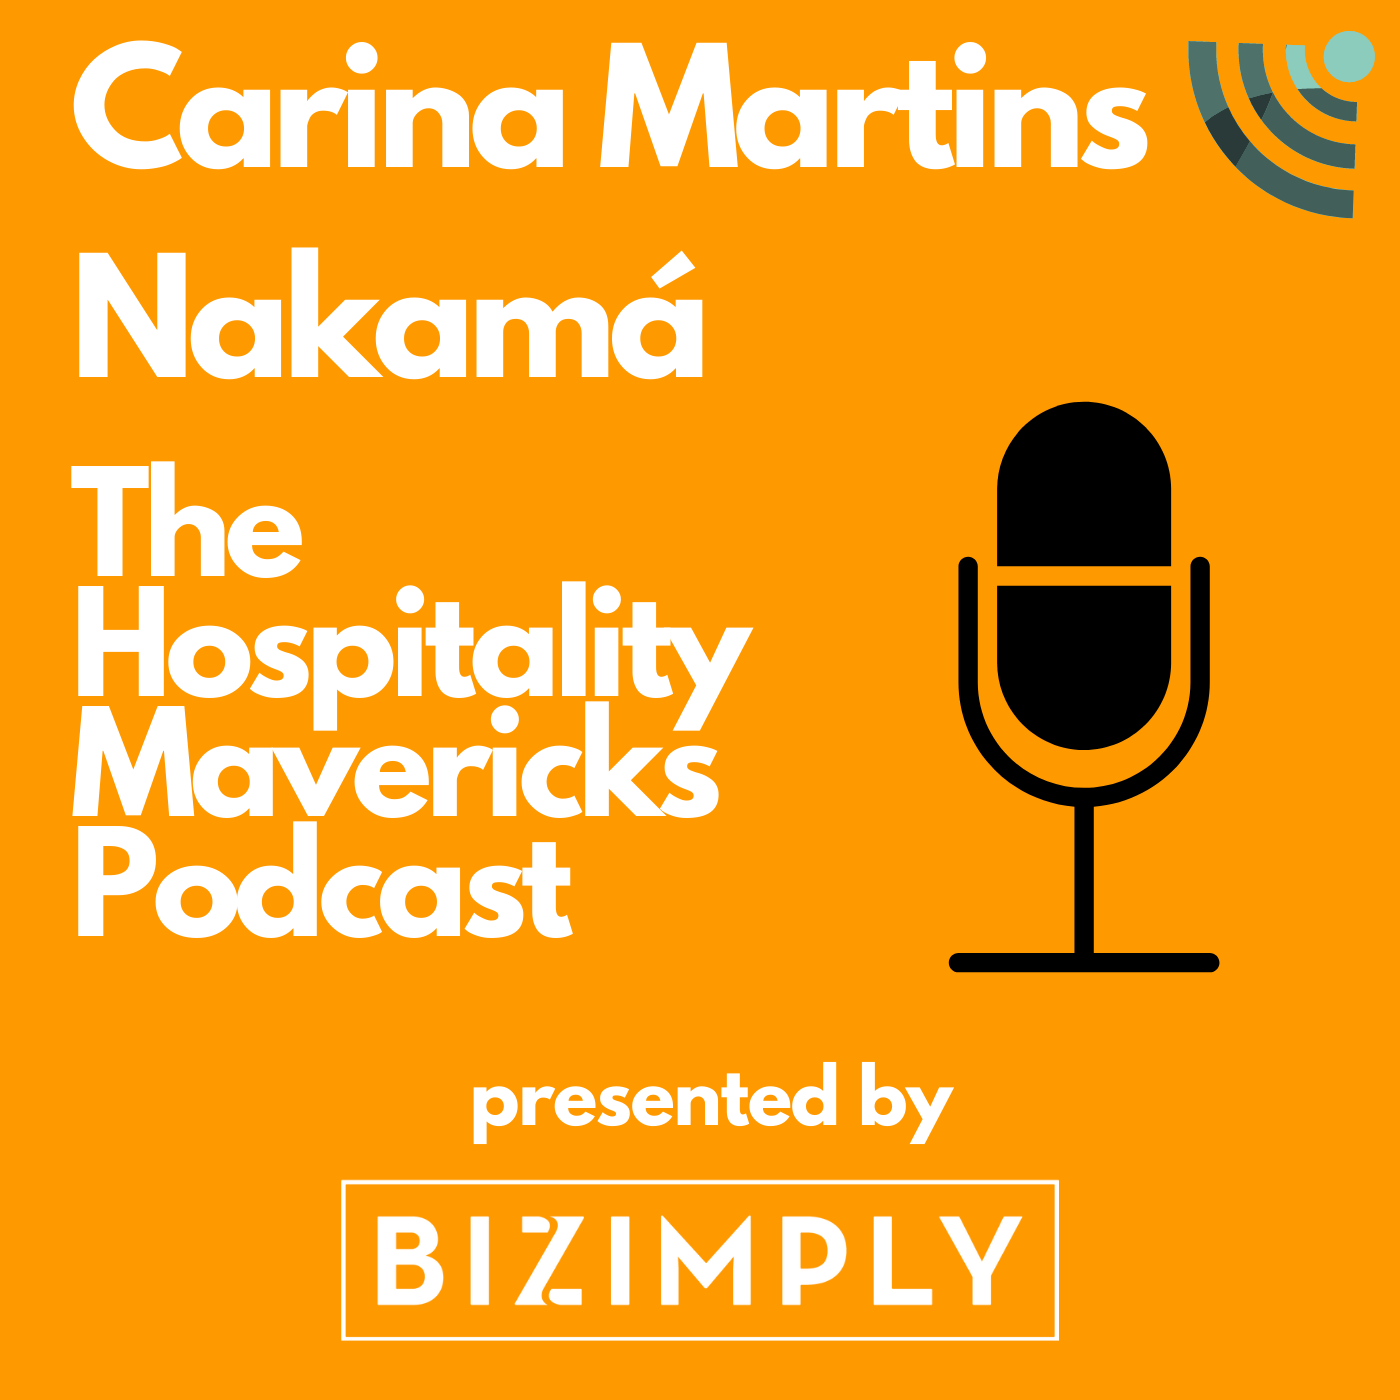 #129 Carina Martins Nakamá, Founder of Benessere, on Checklists, Calmness and Communication Image